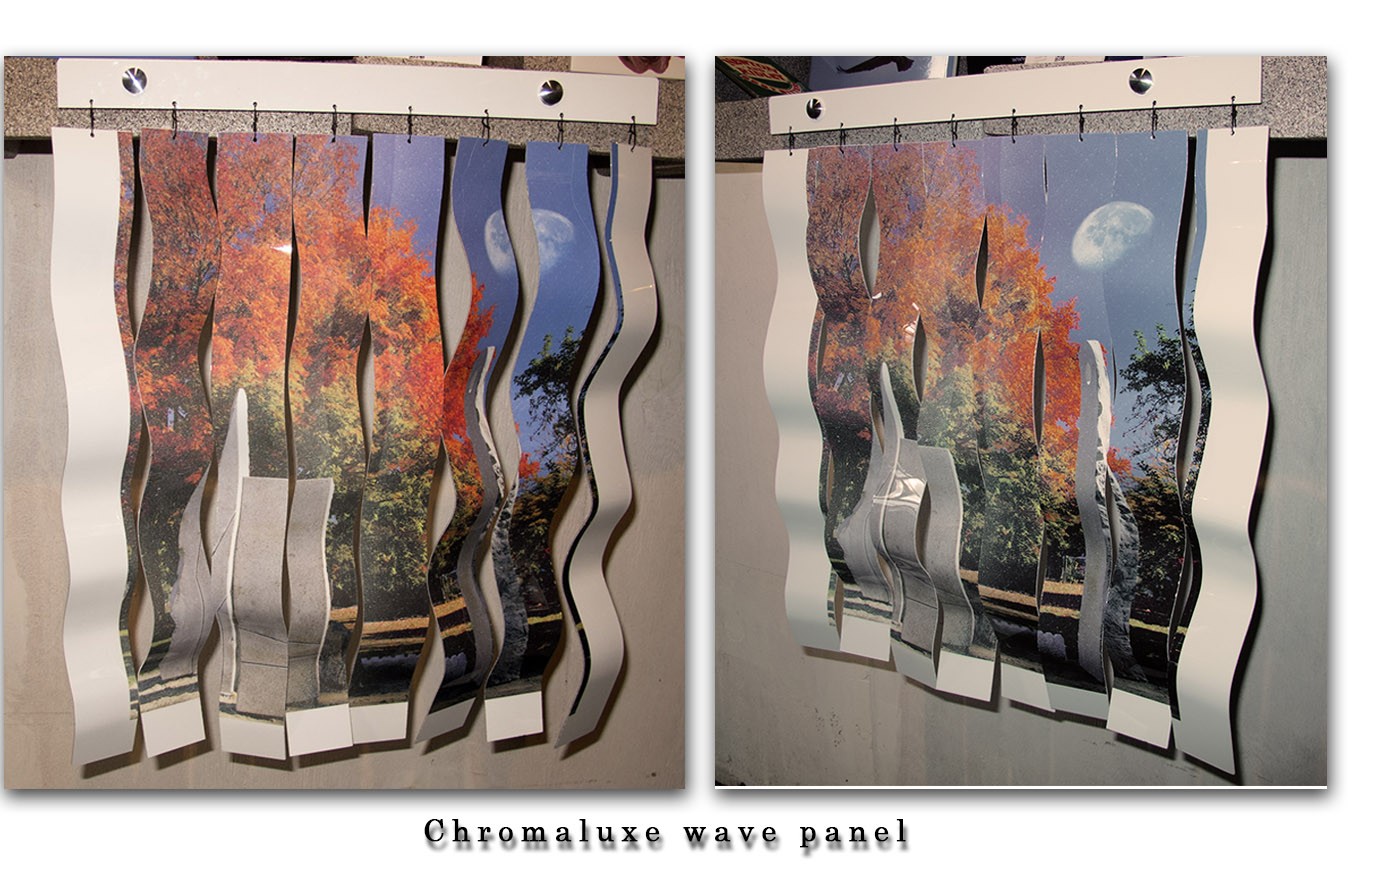 Chromaluxe Wave panel made with sublimation printing